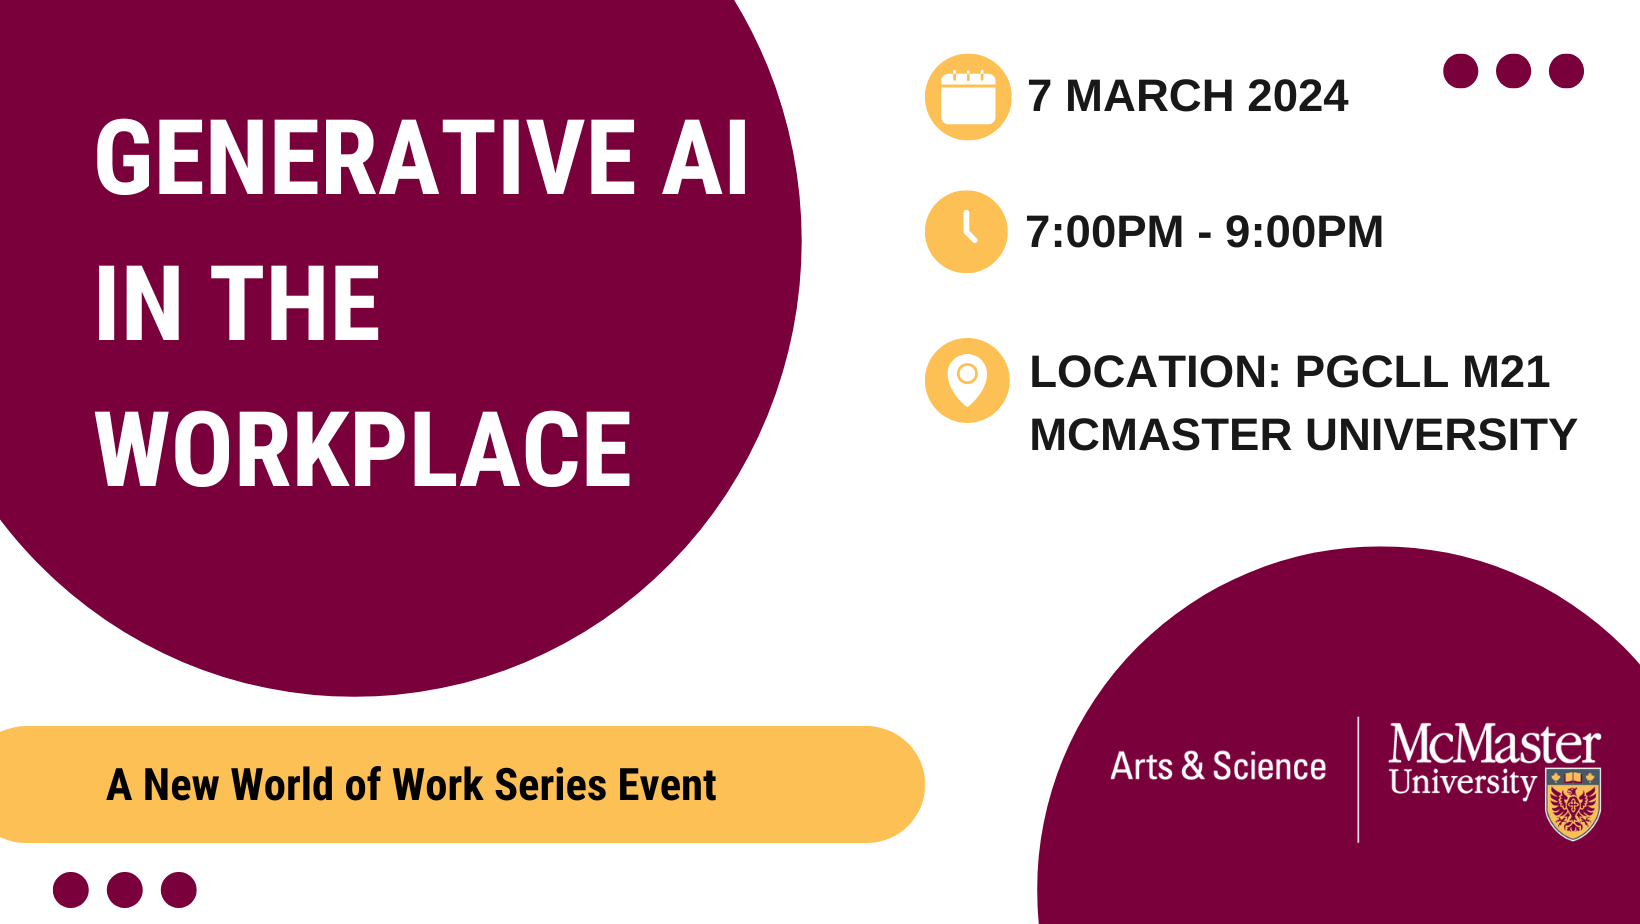 New World of Work Series Event: Generative AI in the Workplace